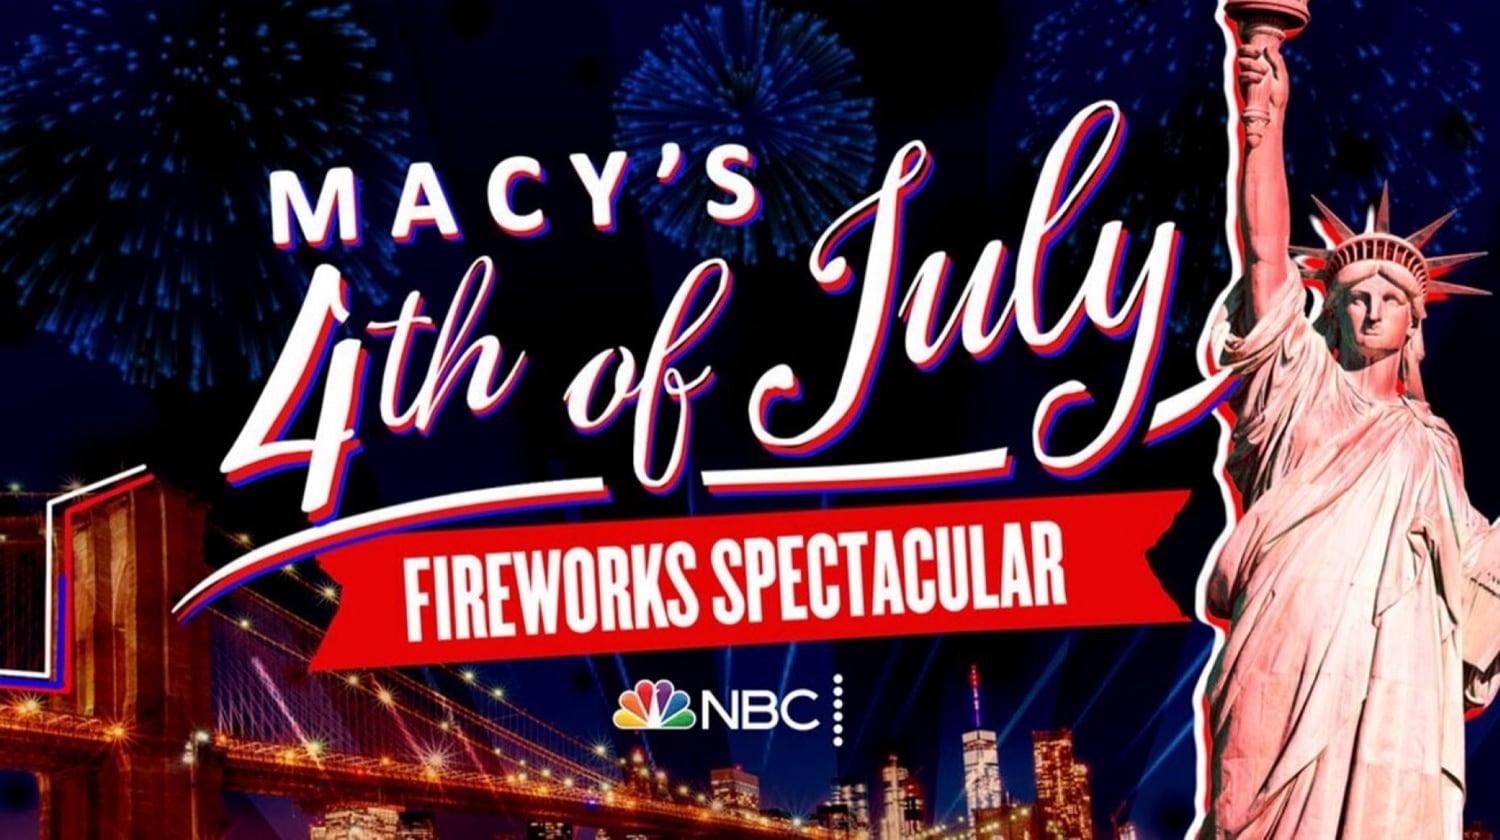 Macy's 4th of july fireworks spectacular.